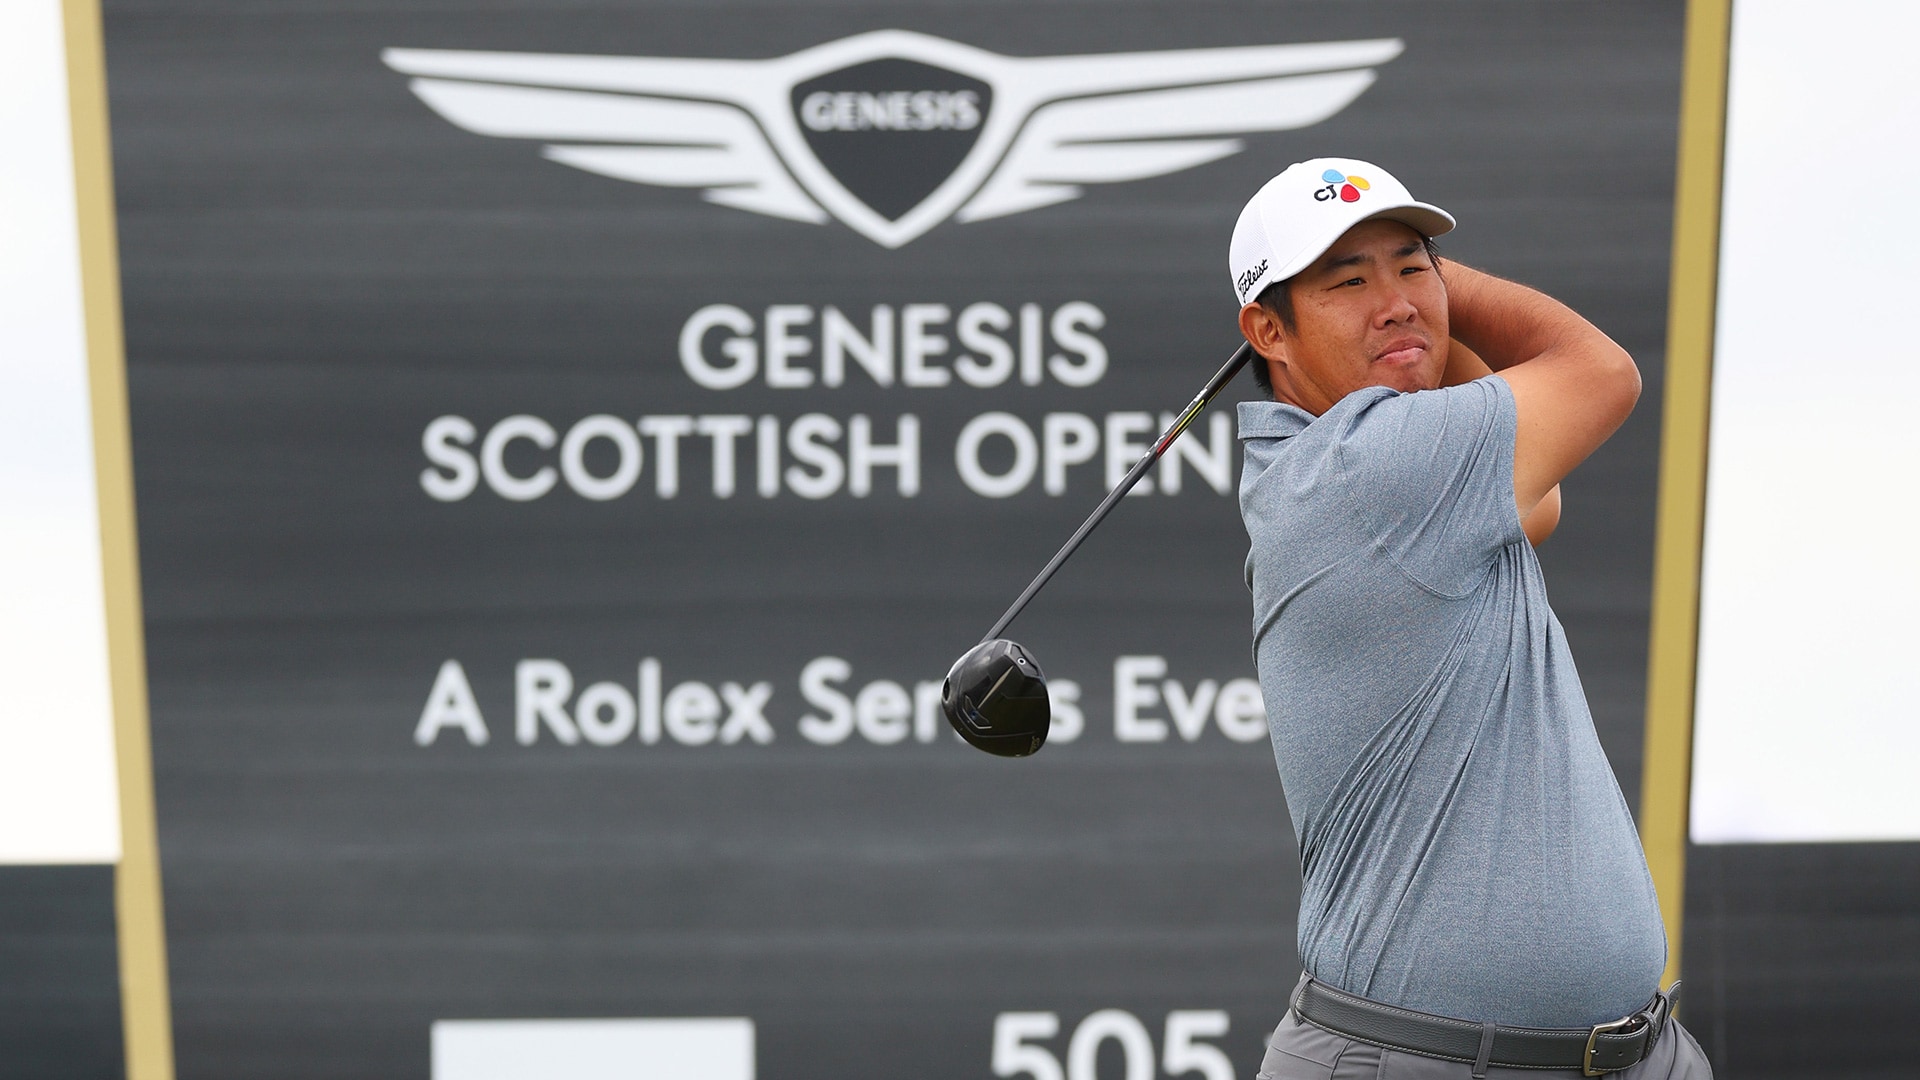 Ben An opens with 61 at Scottish Open with hope for more links golf